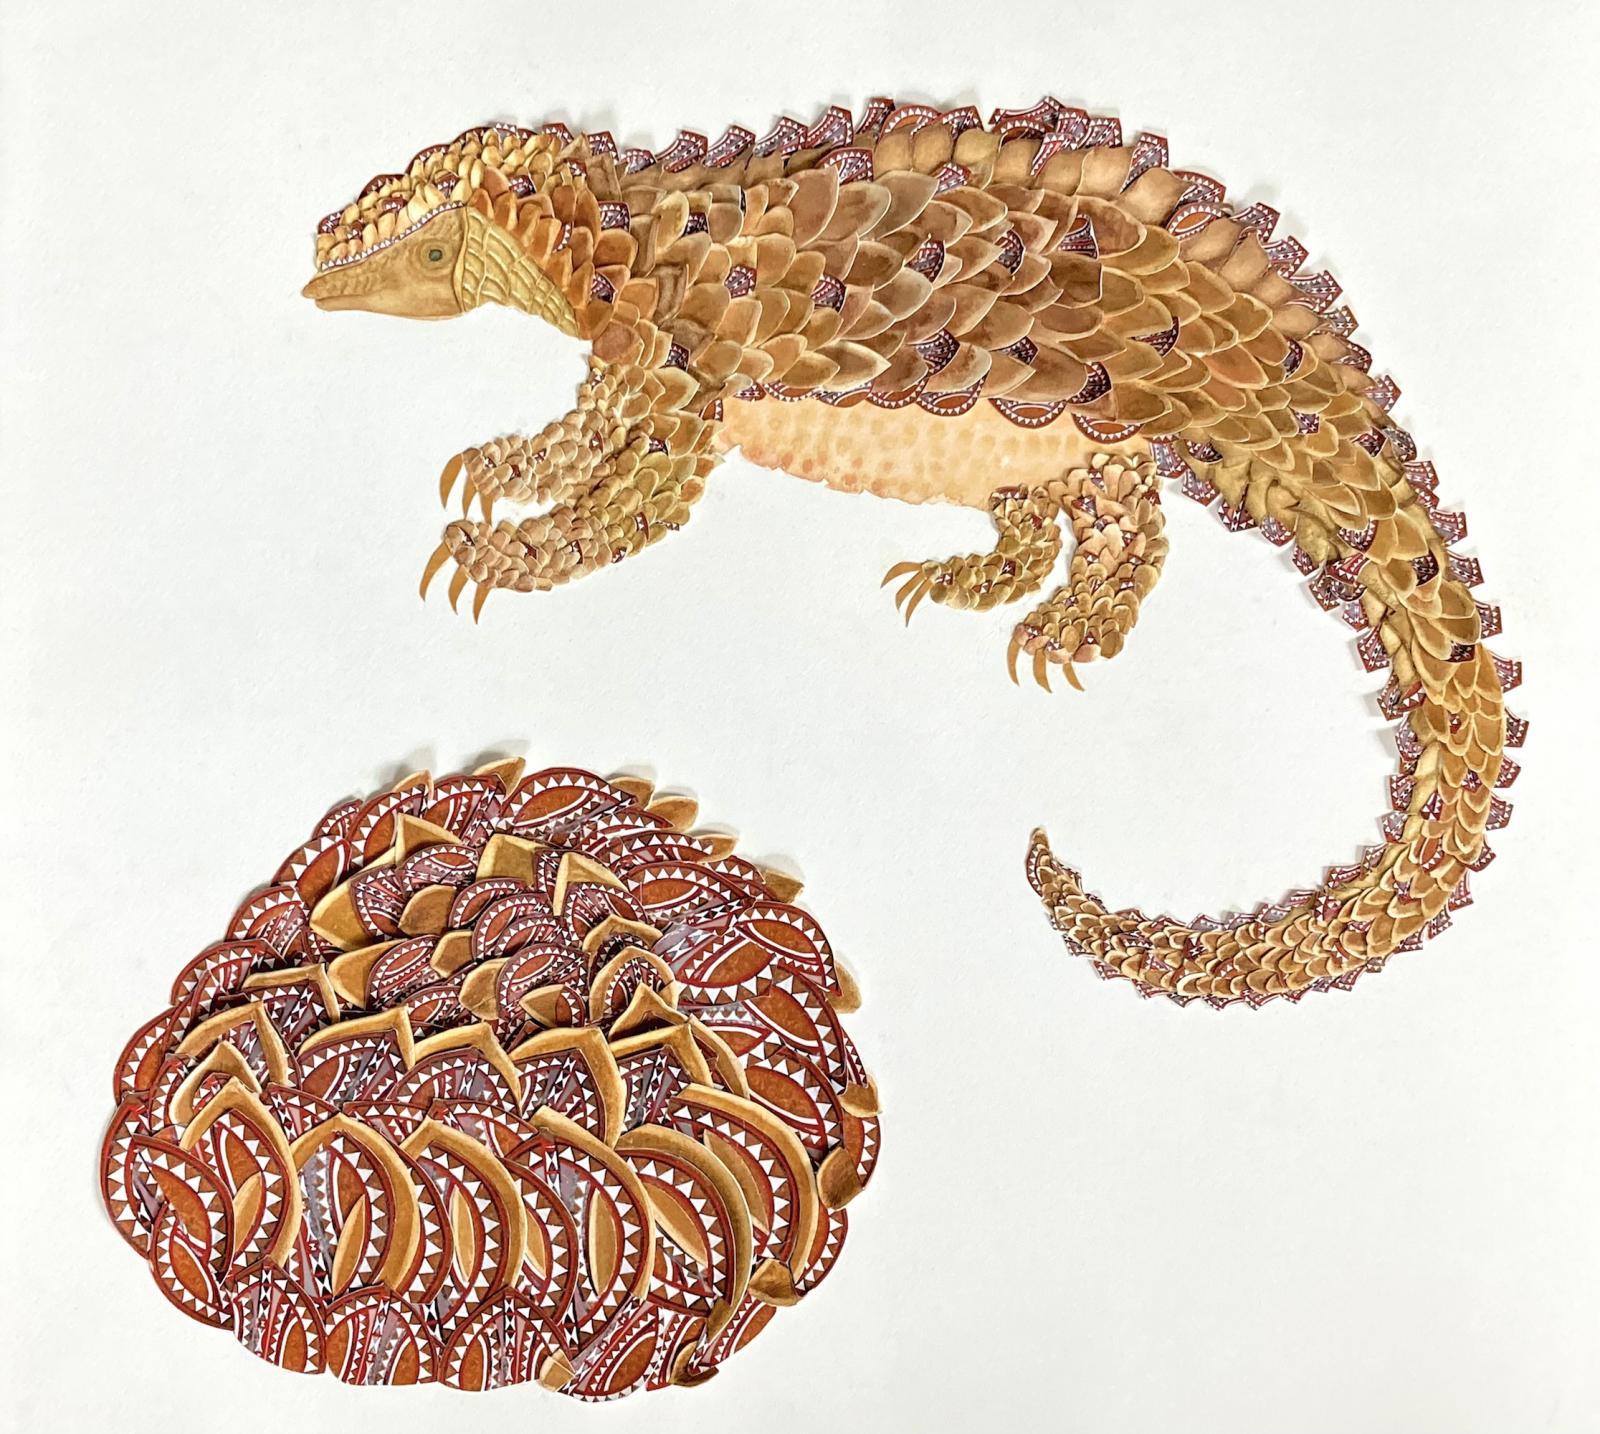 Endangered pangolins are the only mammals wholly-covered In scales and they use those scales to protect themselves from predators in the wild. If under threat, a pangolin will immediately curl into a tight ball and will use their sharp-scaled tails to defend themselves.

In this case, an added layer of protection; Massai shields defend against accusations that pangolins are responsible for the zoo tonic transmission of the coronavirus from bats to humans this theory has since been debunked.
Embellishments on the shields resemble pangolin scales leaving no doubt that Massai ornamentation is influenced by the fauna surrounding them.
